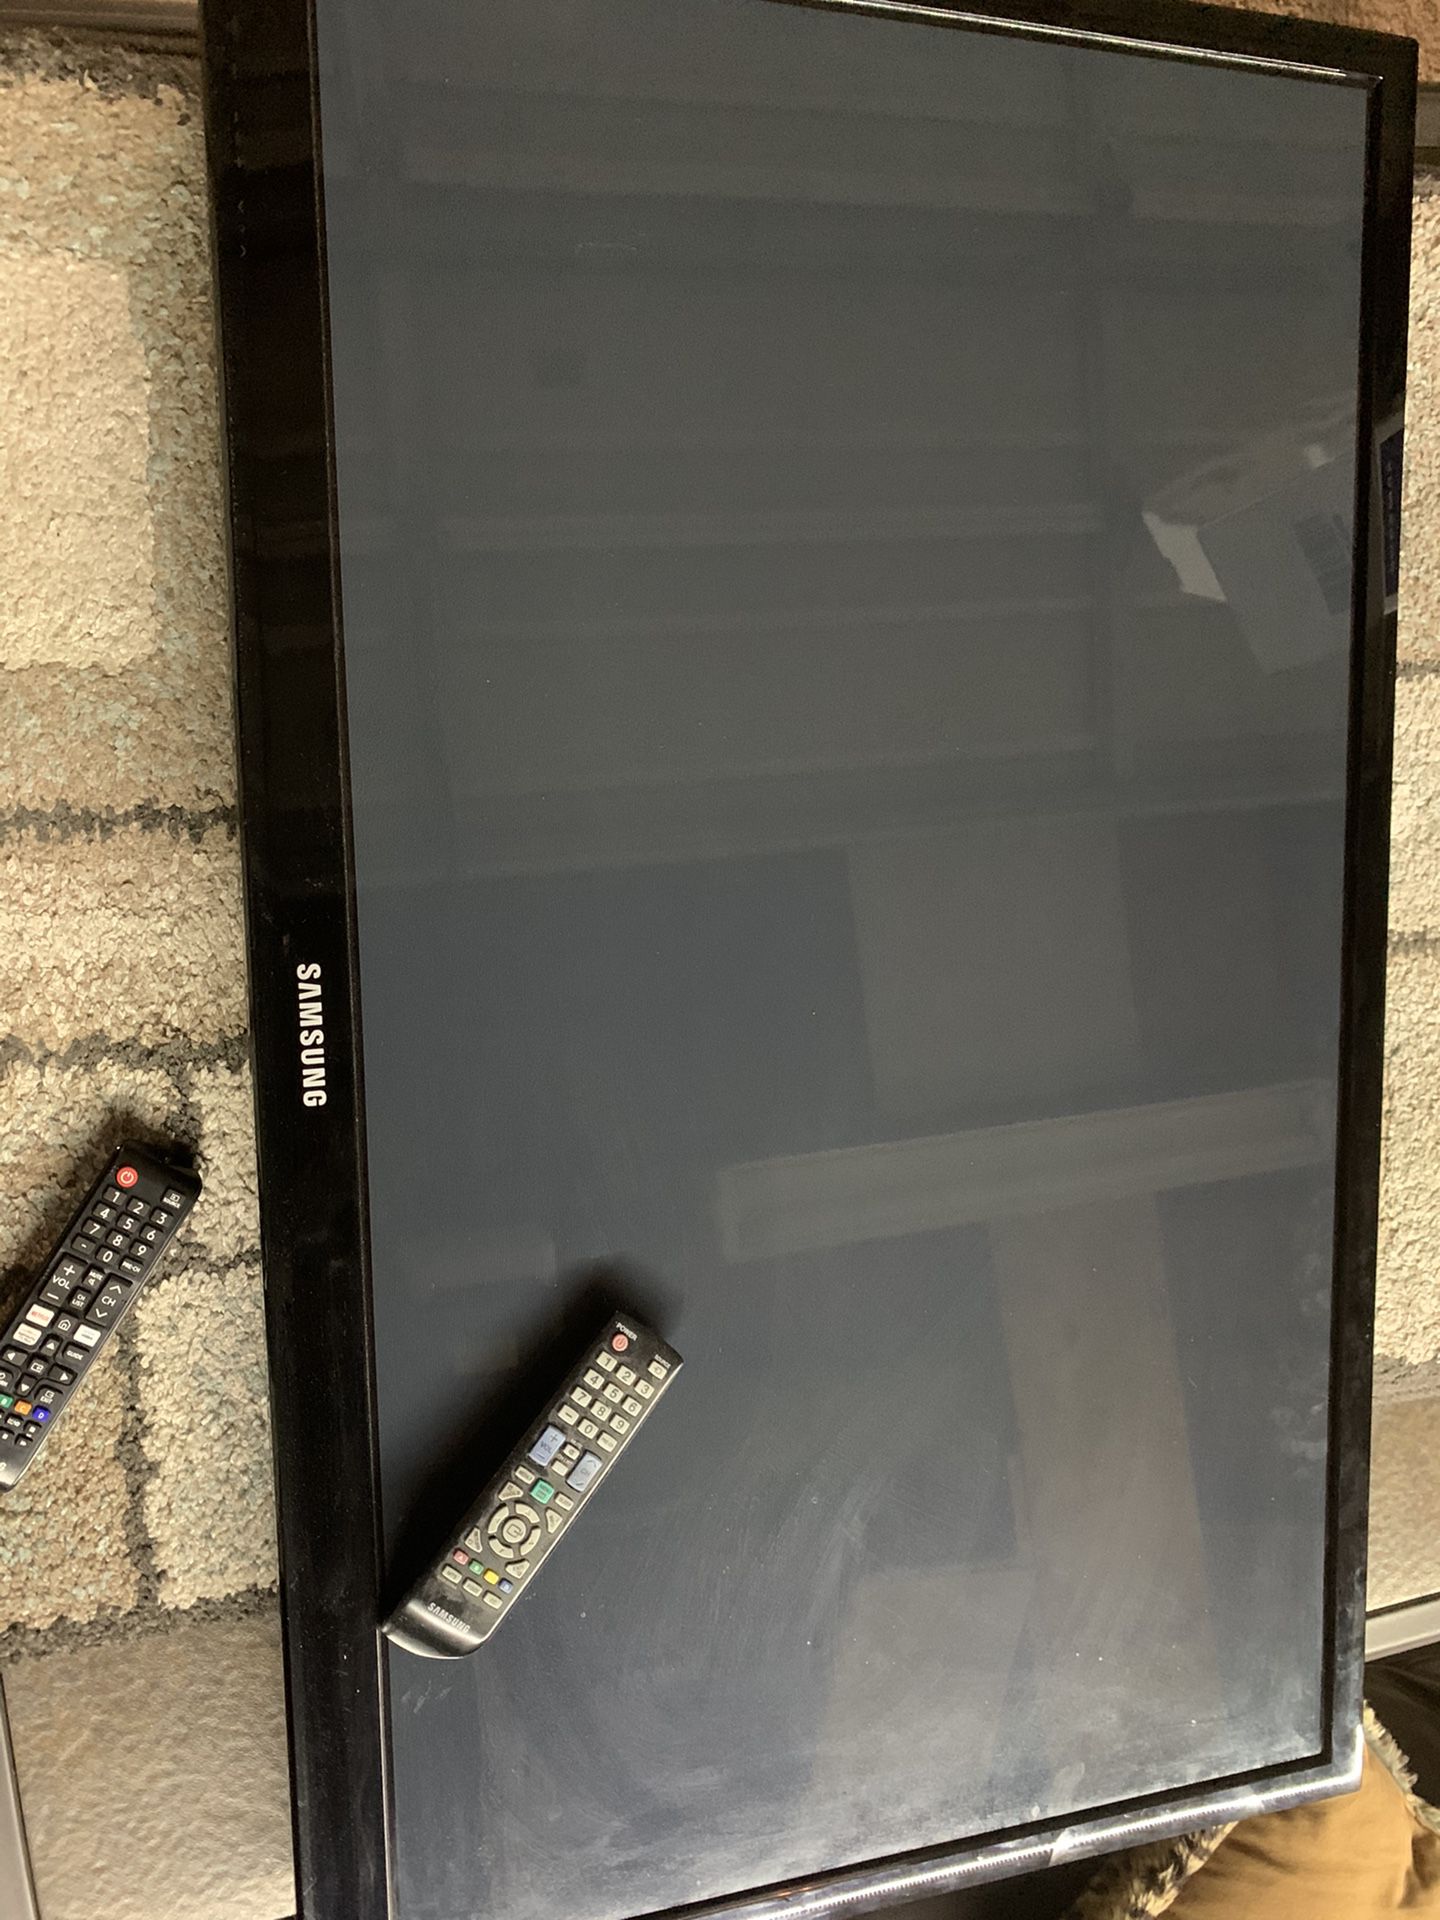 43 inch Samsung Flat Screen excellent condition